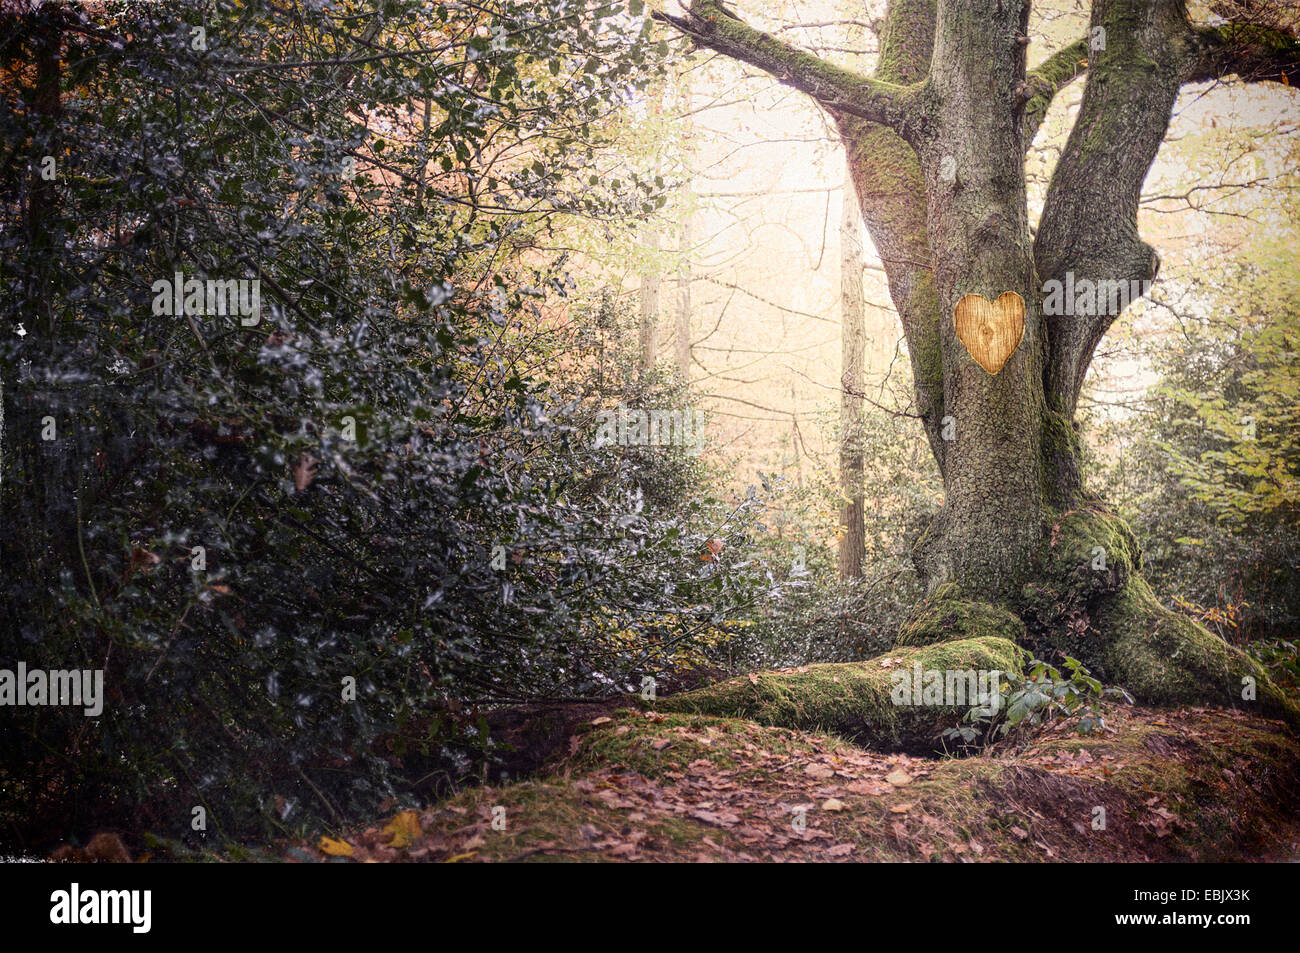 Heart shape carved into old tree in misty forest Stock Photo